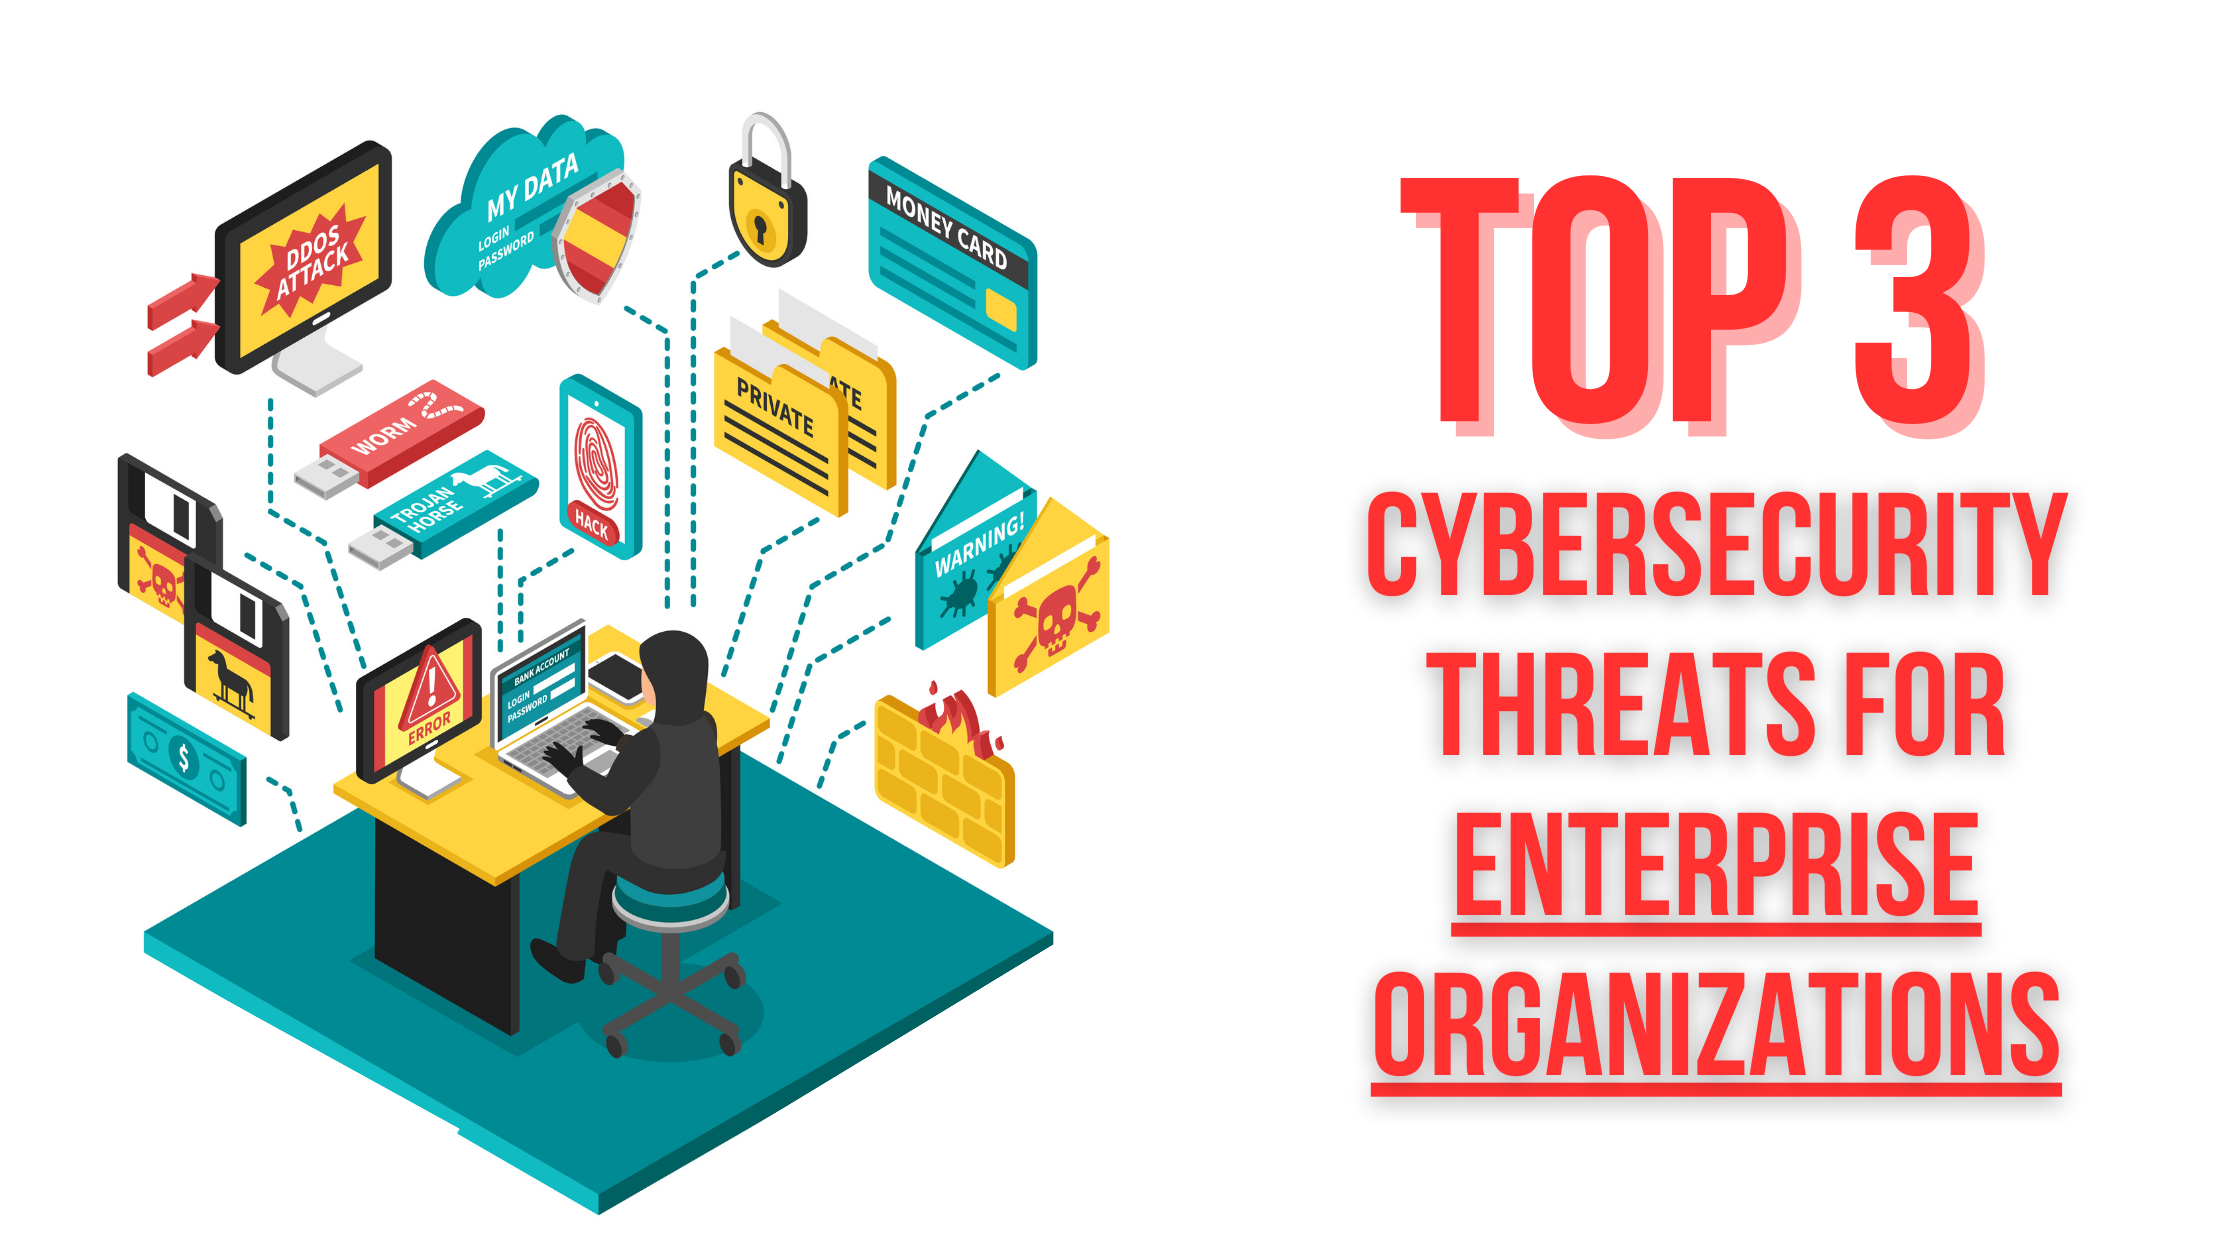 Top 3 cybersecurity threats for enterprise organizations